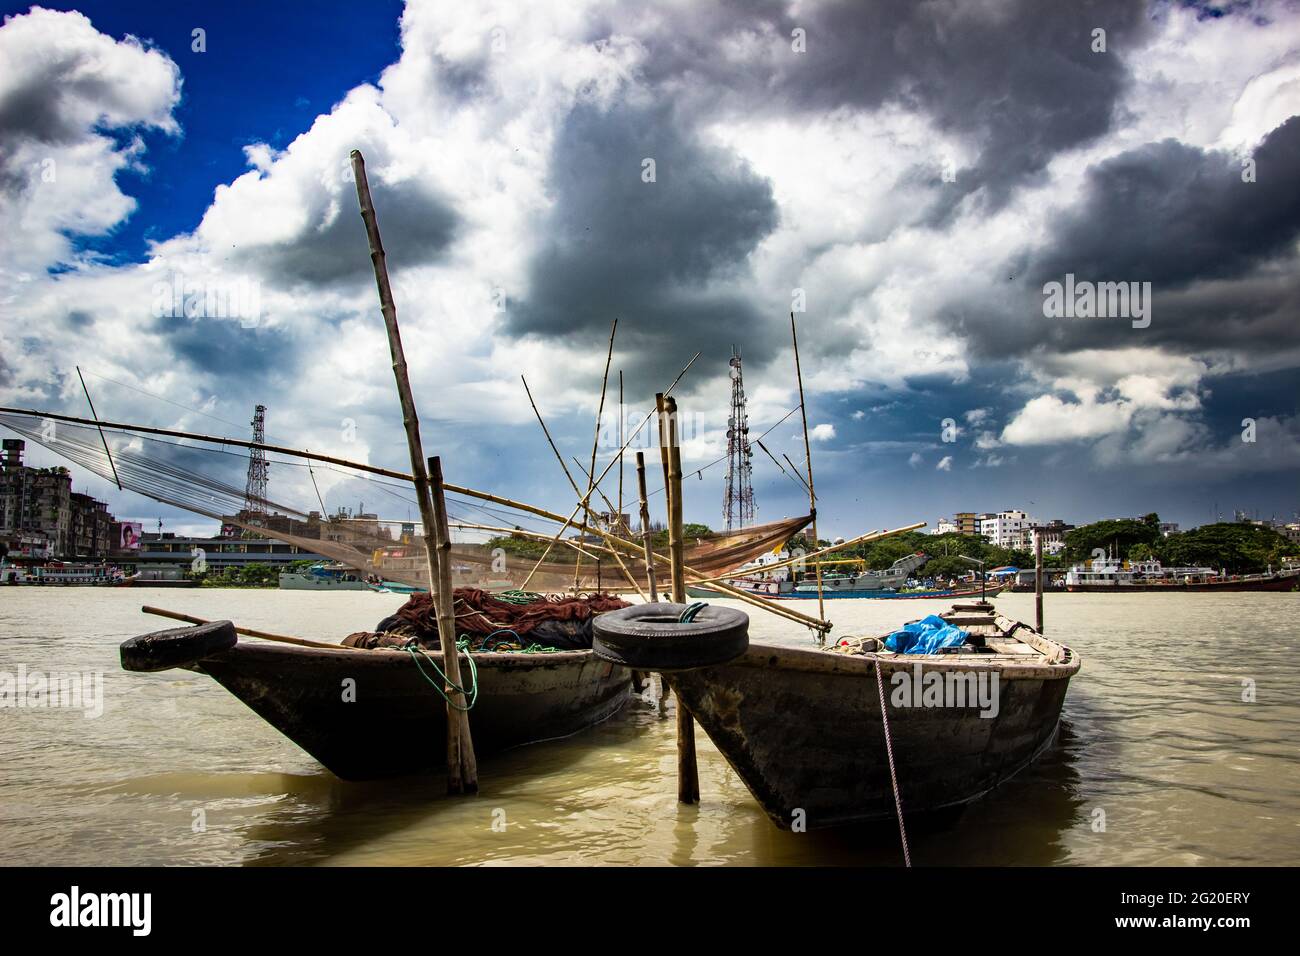 Traditional fishing boat on the riverbank under the cloudy sky, This image captured on September 21, 2018, from Narayangonj, Bangladesh, South Asia Stock Photo